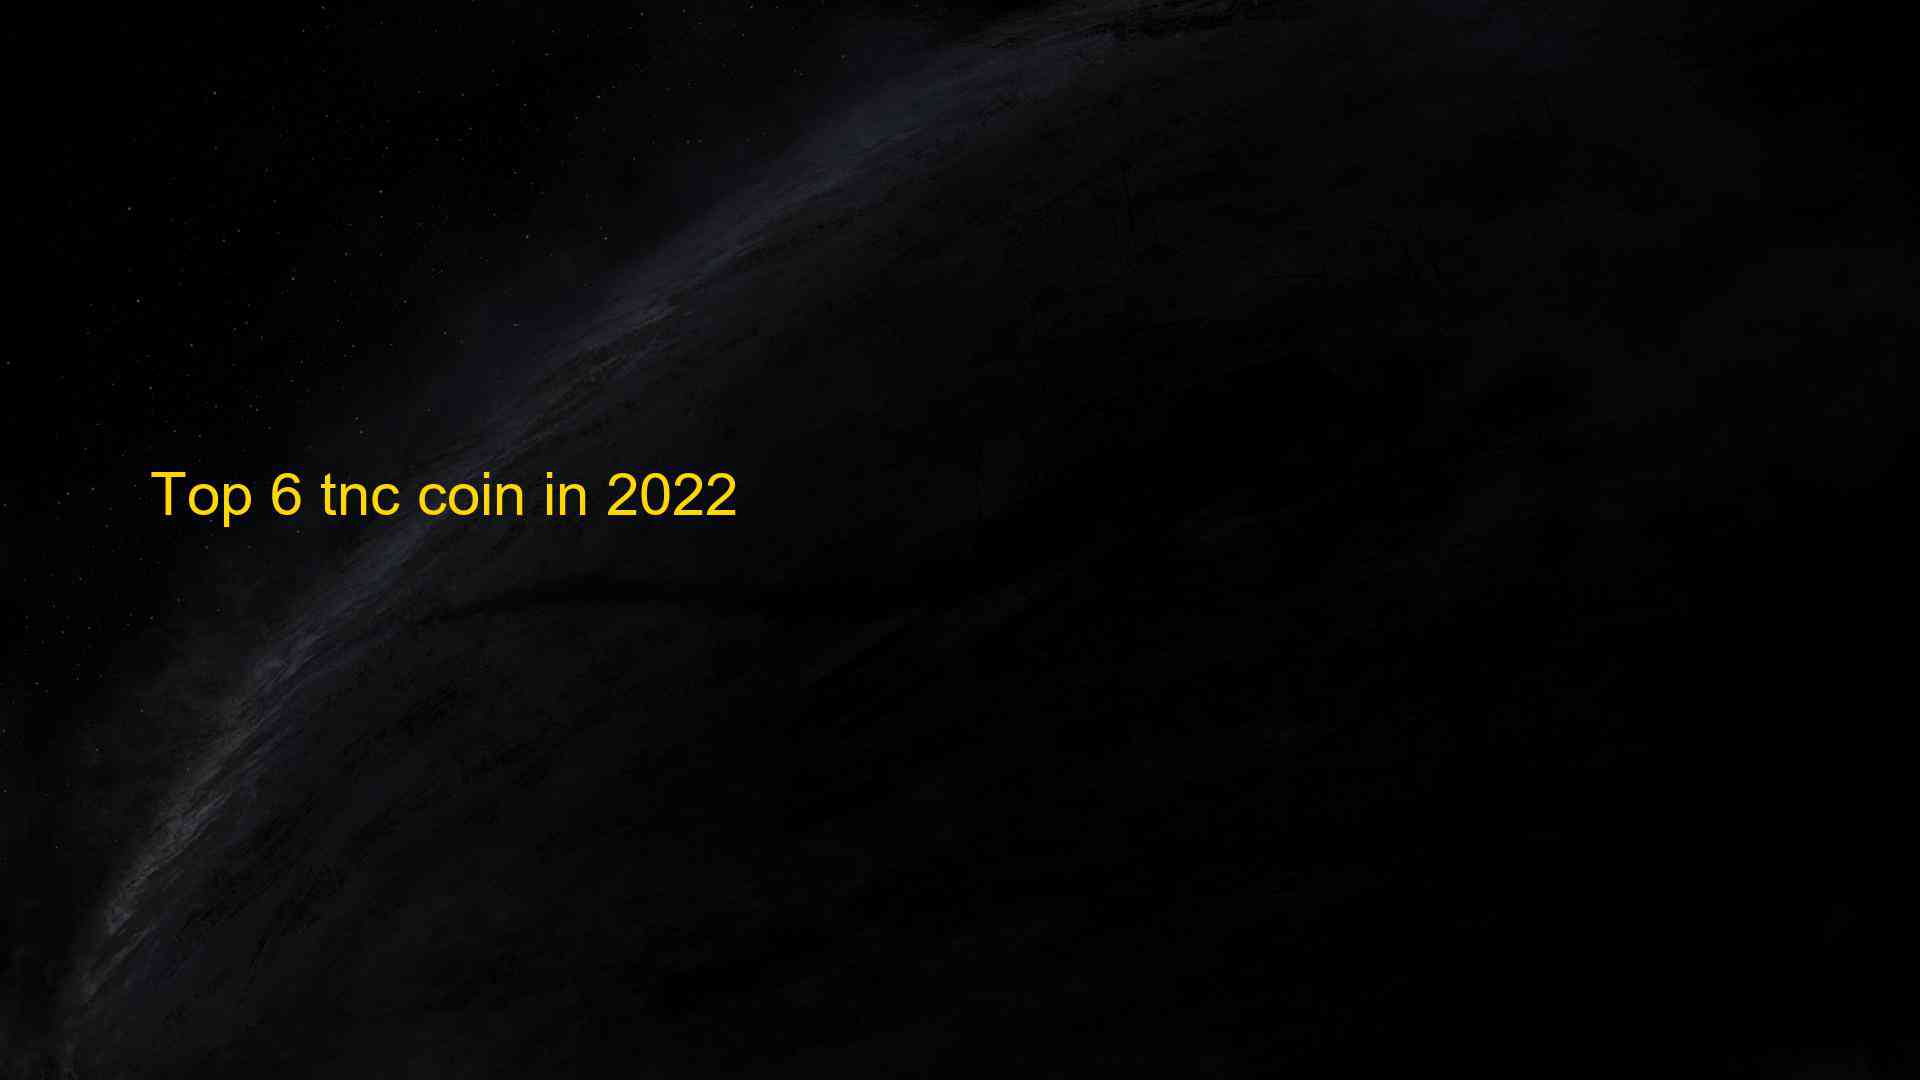 Top 6 tnc coin in 2022 1659965512